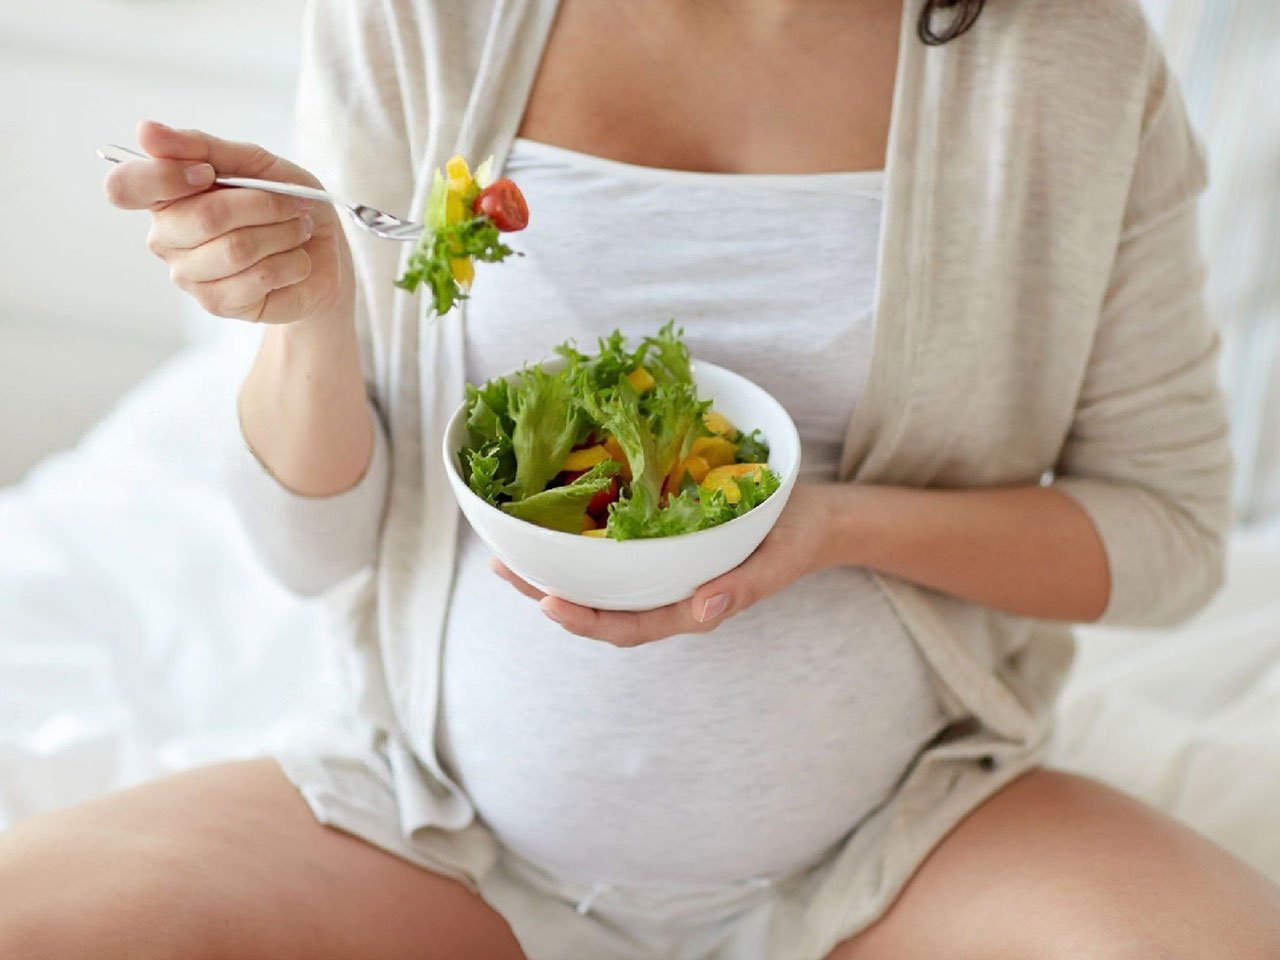 Foods to Eat When Pregnant